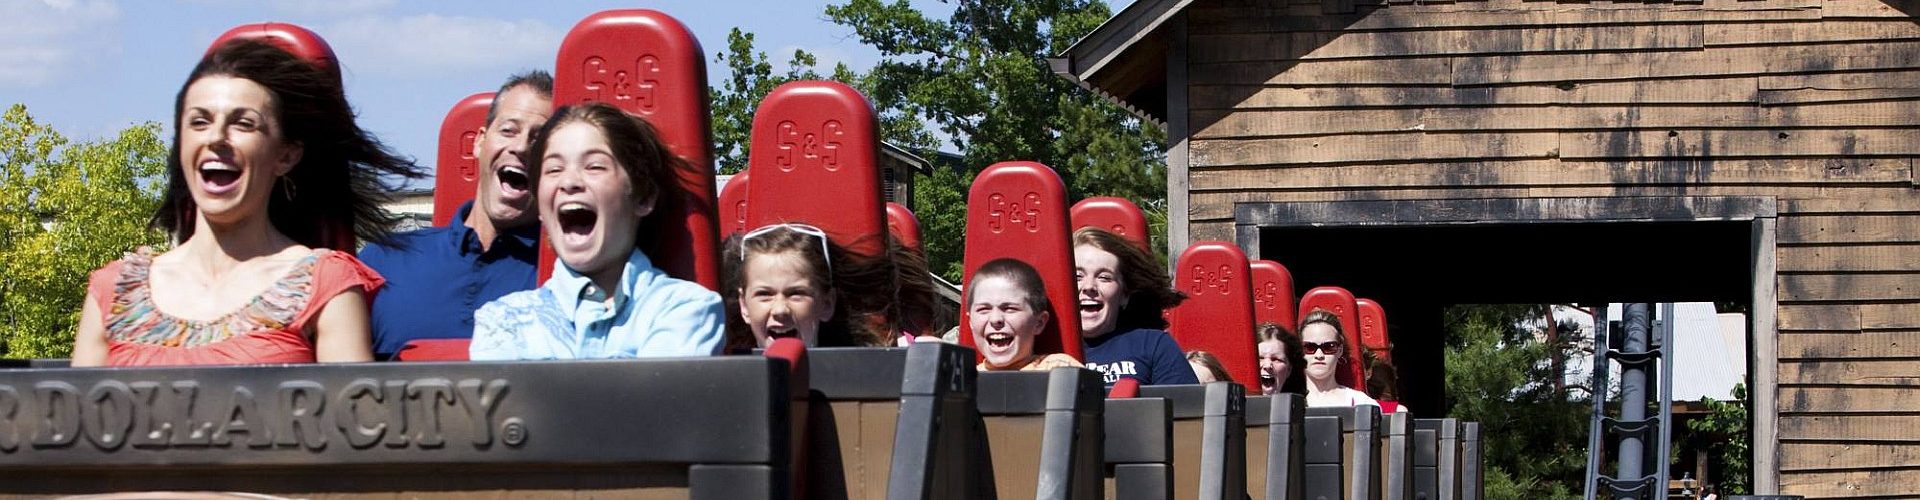 The Ultimate Silver Dollar City Guide